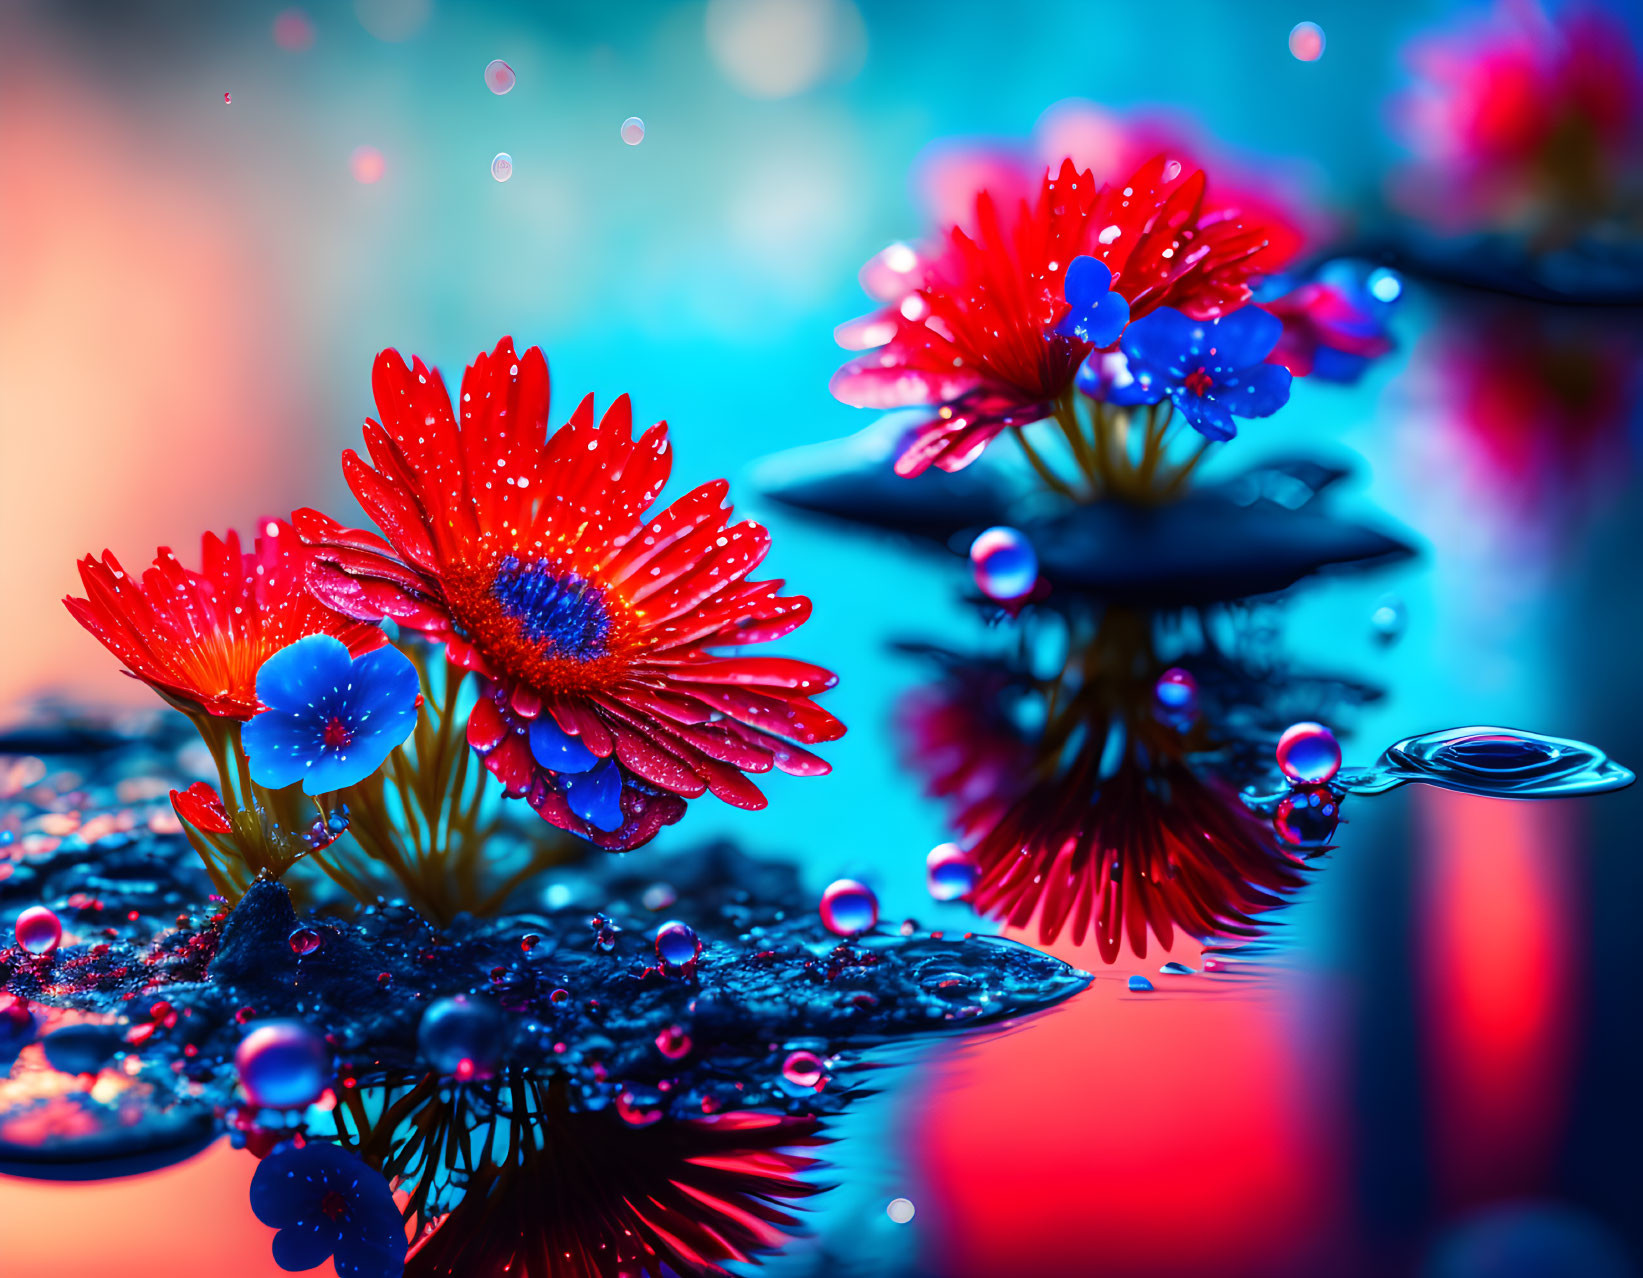 Colorful red and blue flowers with water droplets reflected on calm water surface.